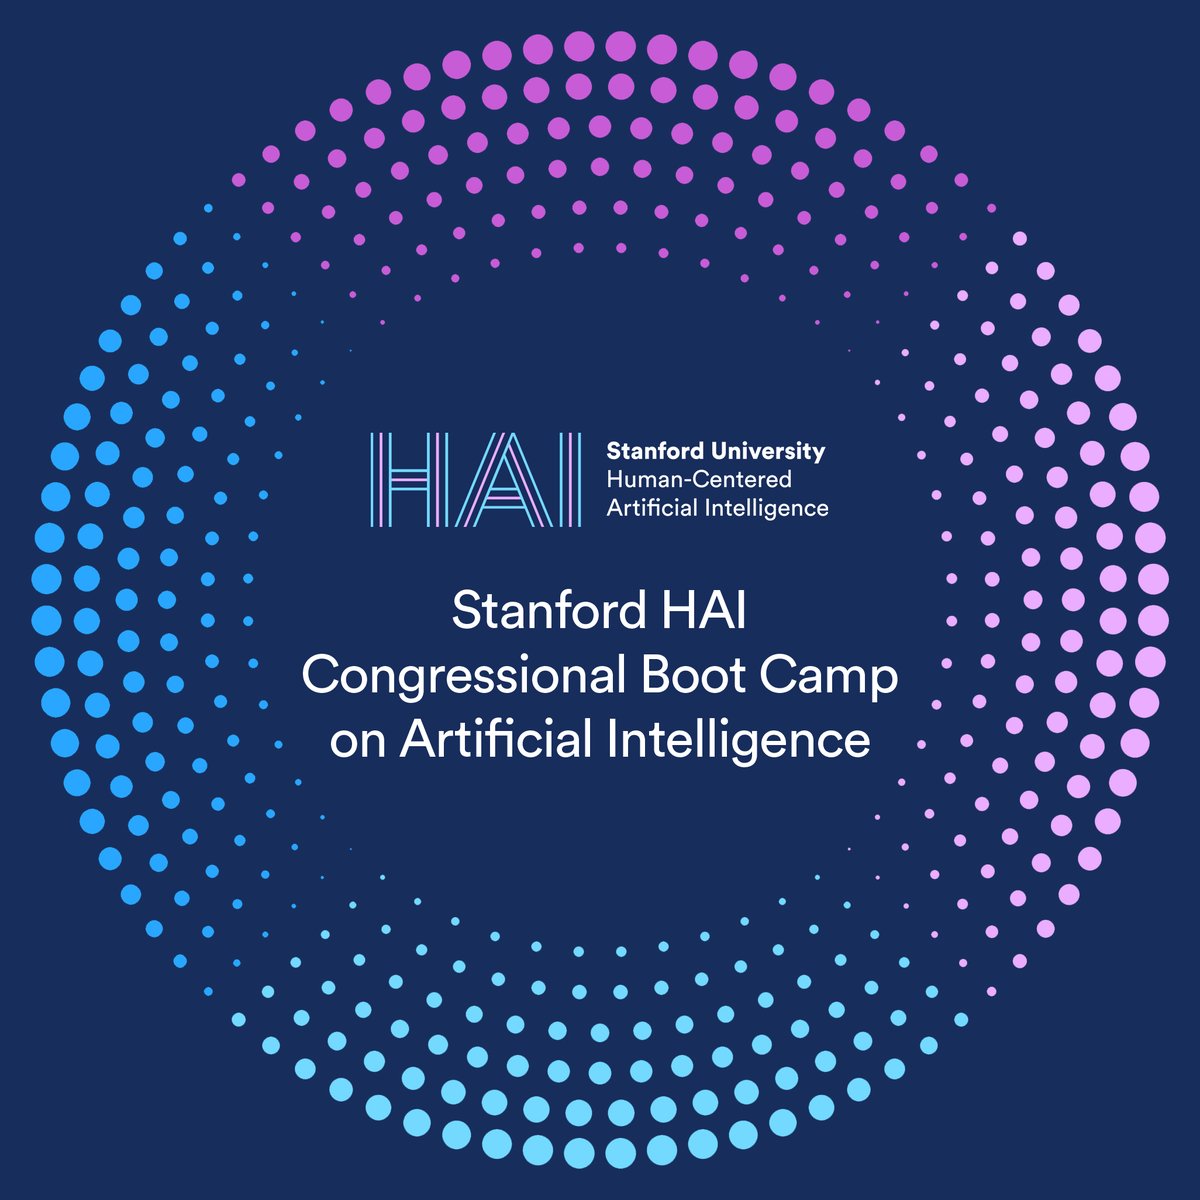 Application is now open for the @StanfordHAI Congressional Boot Camp on AI – now in its 3rd year! The bipartisan program equips congressional staff with comprehensive knowledge needed to think critically about regulating the technology. Apply by June 7: stanford.io/4bNQEjh